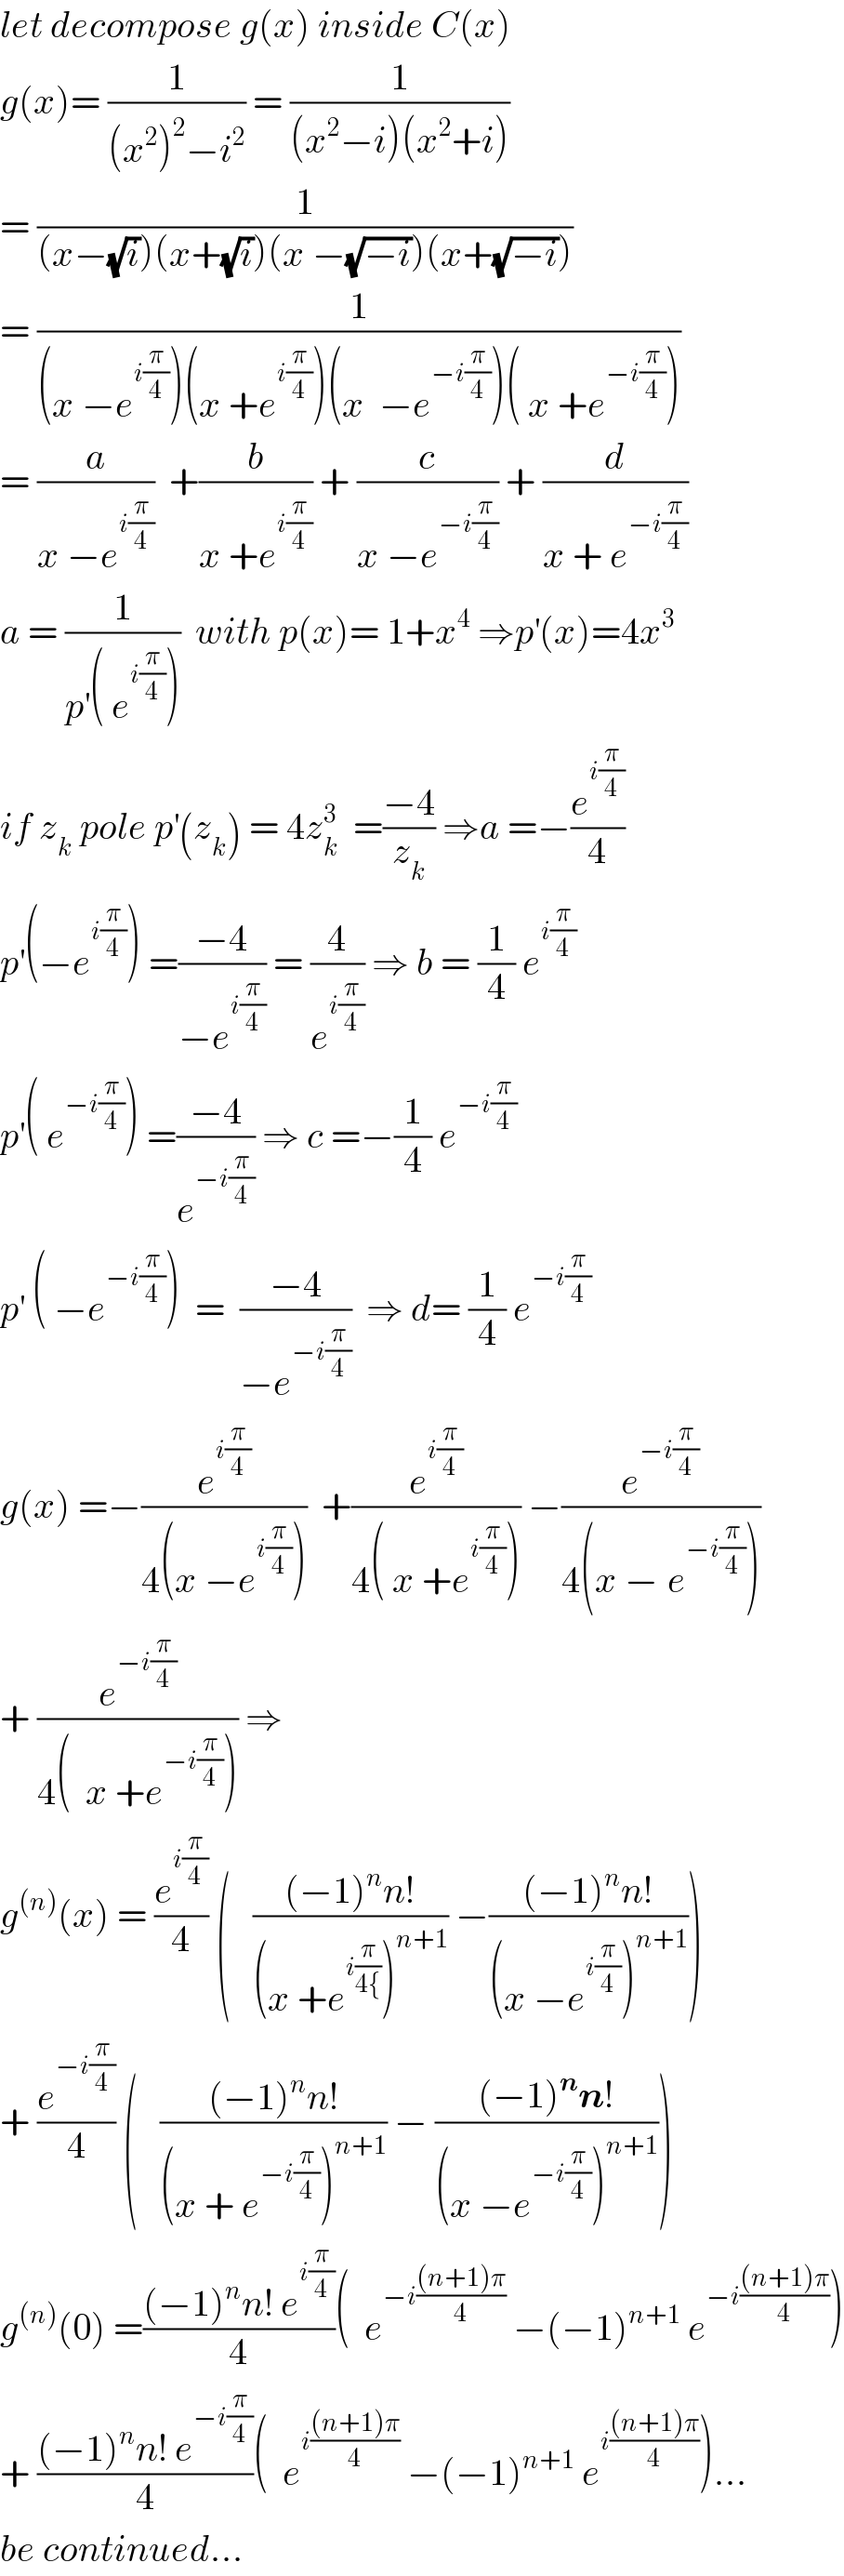 let decompose g(x) inside C(x)  g(x)= (1/((x^2 )^2 −i^2 )) = (1/((x^2 −i)(x^2 +i)))  = (1/((x−(√i))(x+(√i))(x −(√(−i)))(x+(√(−i)))))  = (1/((x −e^(i(π/4)) )(x +e^(i(π/4)) )(x  −e^(−i(π/4)) )( x +e^(−i(π/4)) )))  = (a/(x −e^(i(π/4)) ))  +(b/(x +e^(i(π/4)) )) + (c/(x −e^(−i(π/4)) )) + (d/(x + e^(−i(π/4)) ))  a = (1/(p^′ ( e^(i(π/4)) )))  with p(x)= 1+x^4  ⇒p^′ (x)=4x^3   if z_k  pole p^′ (z_k ) = 4z_k ^3   =((−4)/z_k ) ⇒a =−(e^(i(π/4)) /4)  p^′ (−e^(i(π/4)) ) =((−4)/(−e^(i(π/4)) )) = (4/e^(i(π/4)) ) ⇒ b = (1/4) e^(i(π/4))   p^′ ( e^(−i(π/4)) ) =((−4)/e^(−i(π/4)) ) ⇒ c =−(1/4) e^(−i(π/4))   p^′  ( −e^(−i(π/4)) )  =  ((−4)/(−e^(−i(π/4)) ))  ⇒ d= (1/4) e^(−i(π/4))   g(x) =−(e^(i(π/4)) /(4(x −e^(i(π/4)) )))  +(e^(i(π/4)) /(4( x +e^(i(π/4)) ))) −(e^(−i(π/4)) /(4(x −_ e^(−i(π/4)) )))  + (e^(−i(π/4)) /(4(  x +e^(−i(π/4)) ))) ⇒  g^((n)) (x) = (e^(i(π/4)) /4) (   (((−1)^n n!)/((x +e^(i(π/(4{))) )^(n+1) )) −(((−1)^n n!)/((x −e^(i(π/4)) )^(n+1) )))  + (e^(−i(π/4)) /4) (   (((−1)^n n!)/((x + e^(−i(π/4)) )^(n+1) )) − (((−1)^n n!)/((x −e^(−i(π/4)) )^(n+1) )))  g^((n)) (0) =(((−1)^n n! e^(i(π/4)) )/4)(  e^(−i(((n+1)π)/4))  −(−1)^(n+1)  e^(−i(((n+1)π)/4)) )  + (((−1)^n n! e^(−i(π/4)) )/4)(  e^(i(((n+1)π)/4))  −(−1)^(n+1)  e^(i(((n+1)π)/4)) )...  be continued...  